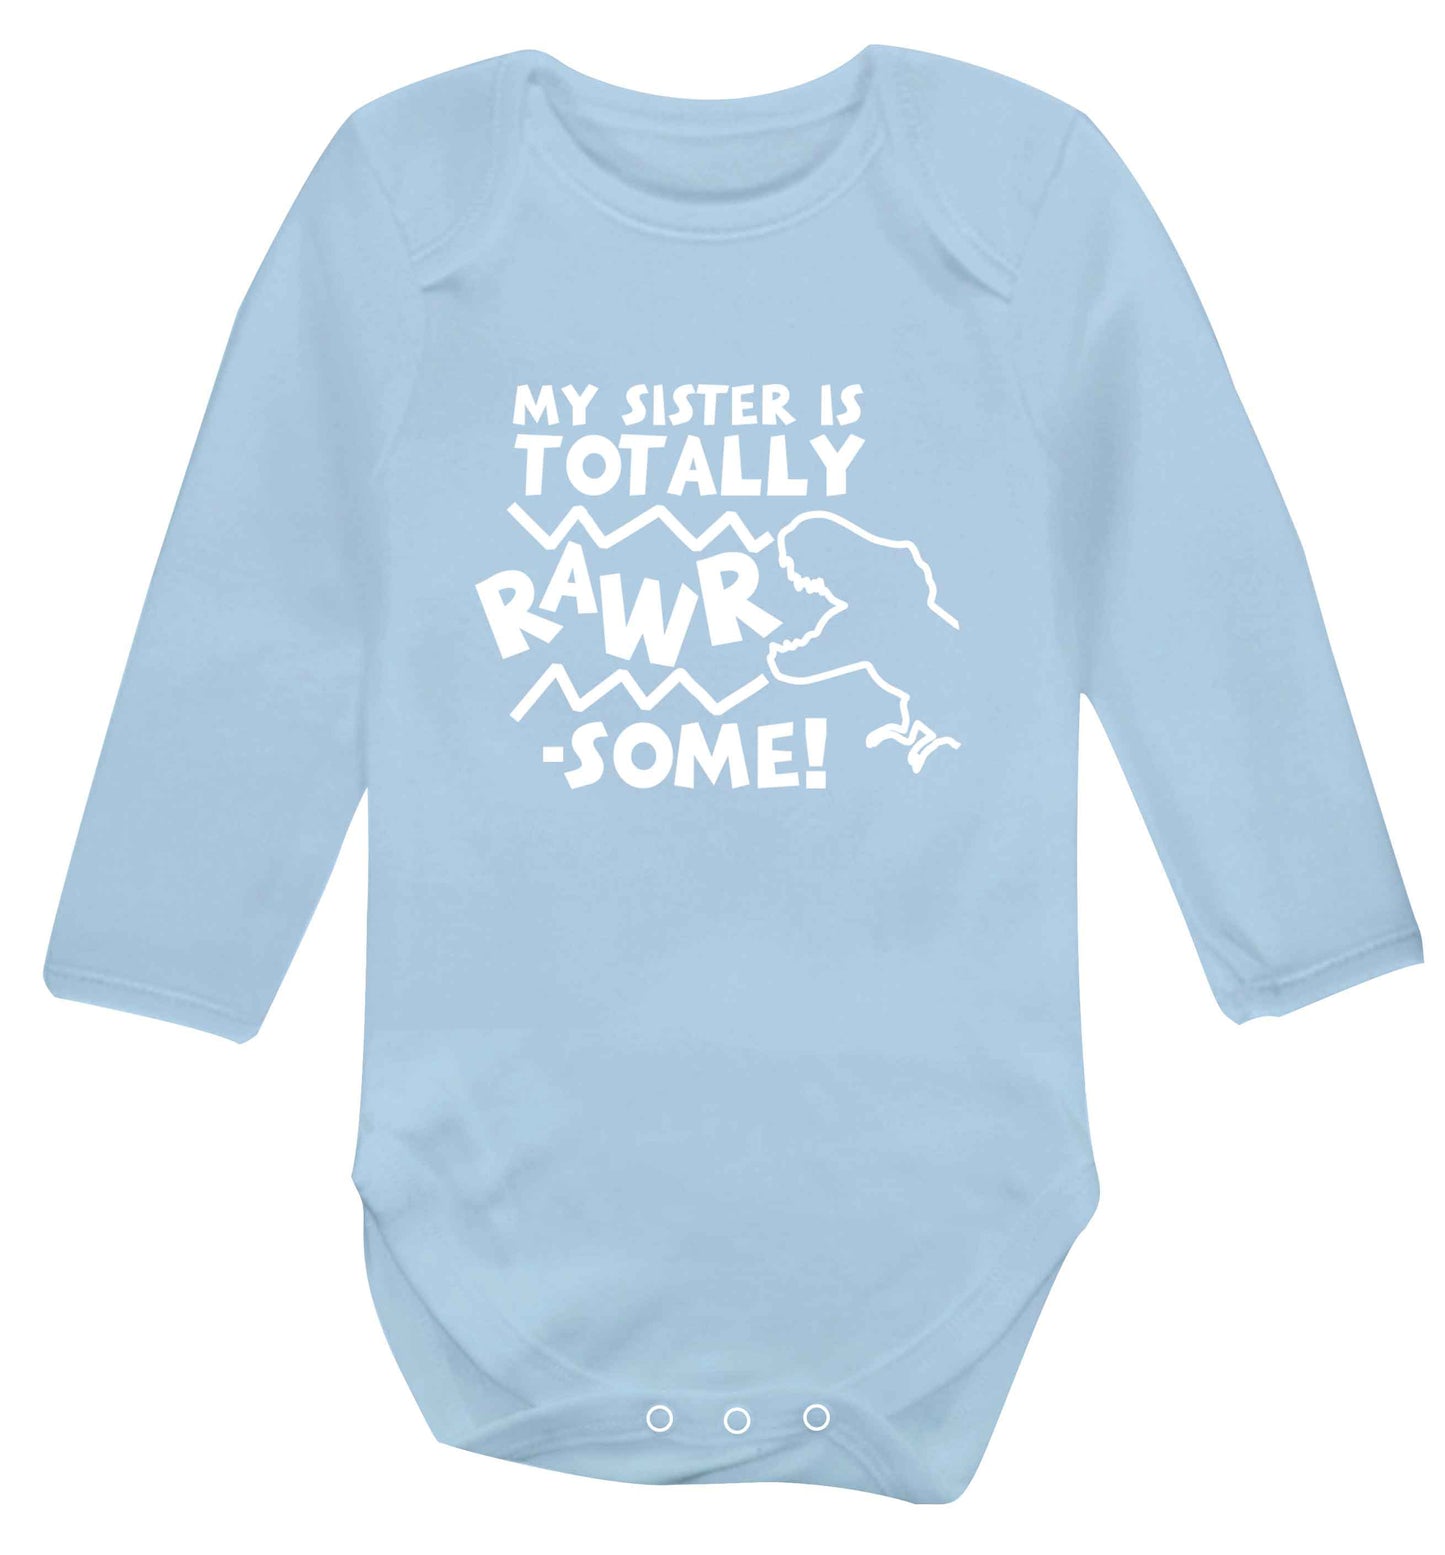 My sister is totally rawrsome baby vest long sleeved pale blue 6-12 months